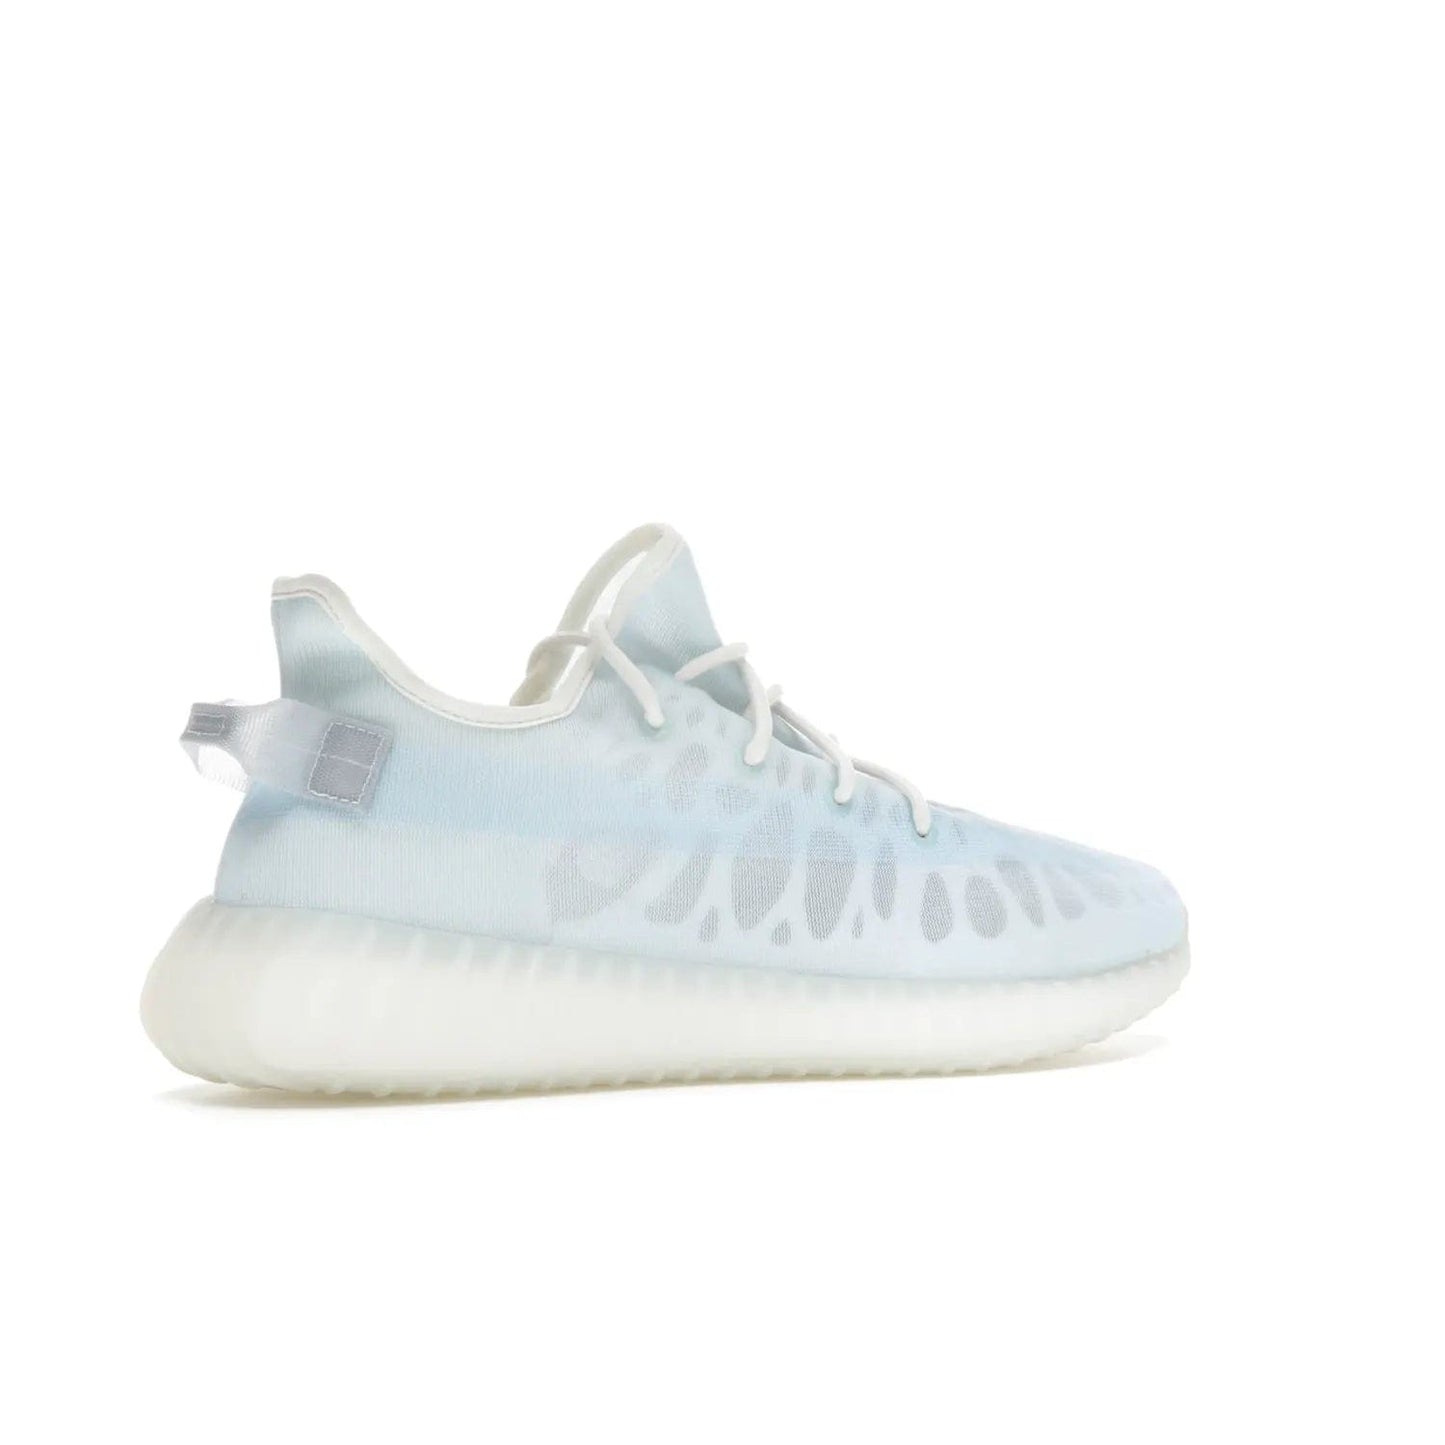 adidas Yeezy Boost 350 V2 Mono Ice - Image 34 - Only at www.BallersClubKickz.com - Introducing the adidas Yeezy 350 V2 Mono Ice - a sleek monofilament mesh design in Ice blue with Boost sole and heel pull tab. Released exclusively in the US for $220.